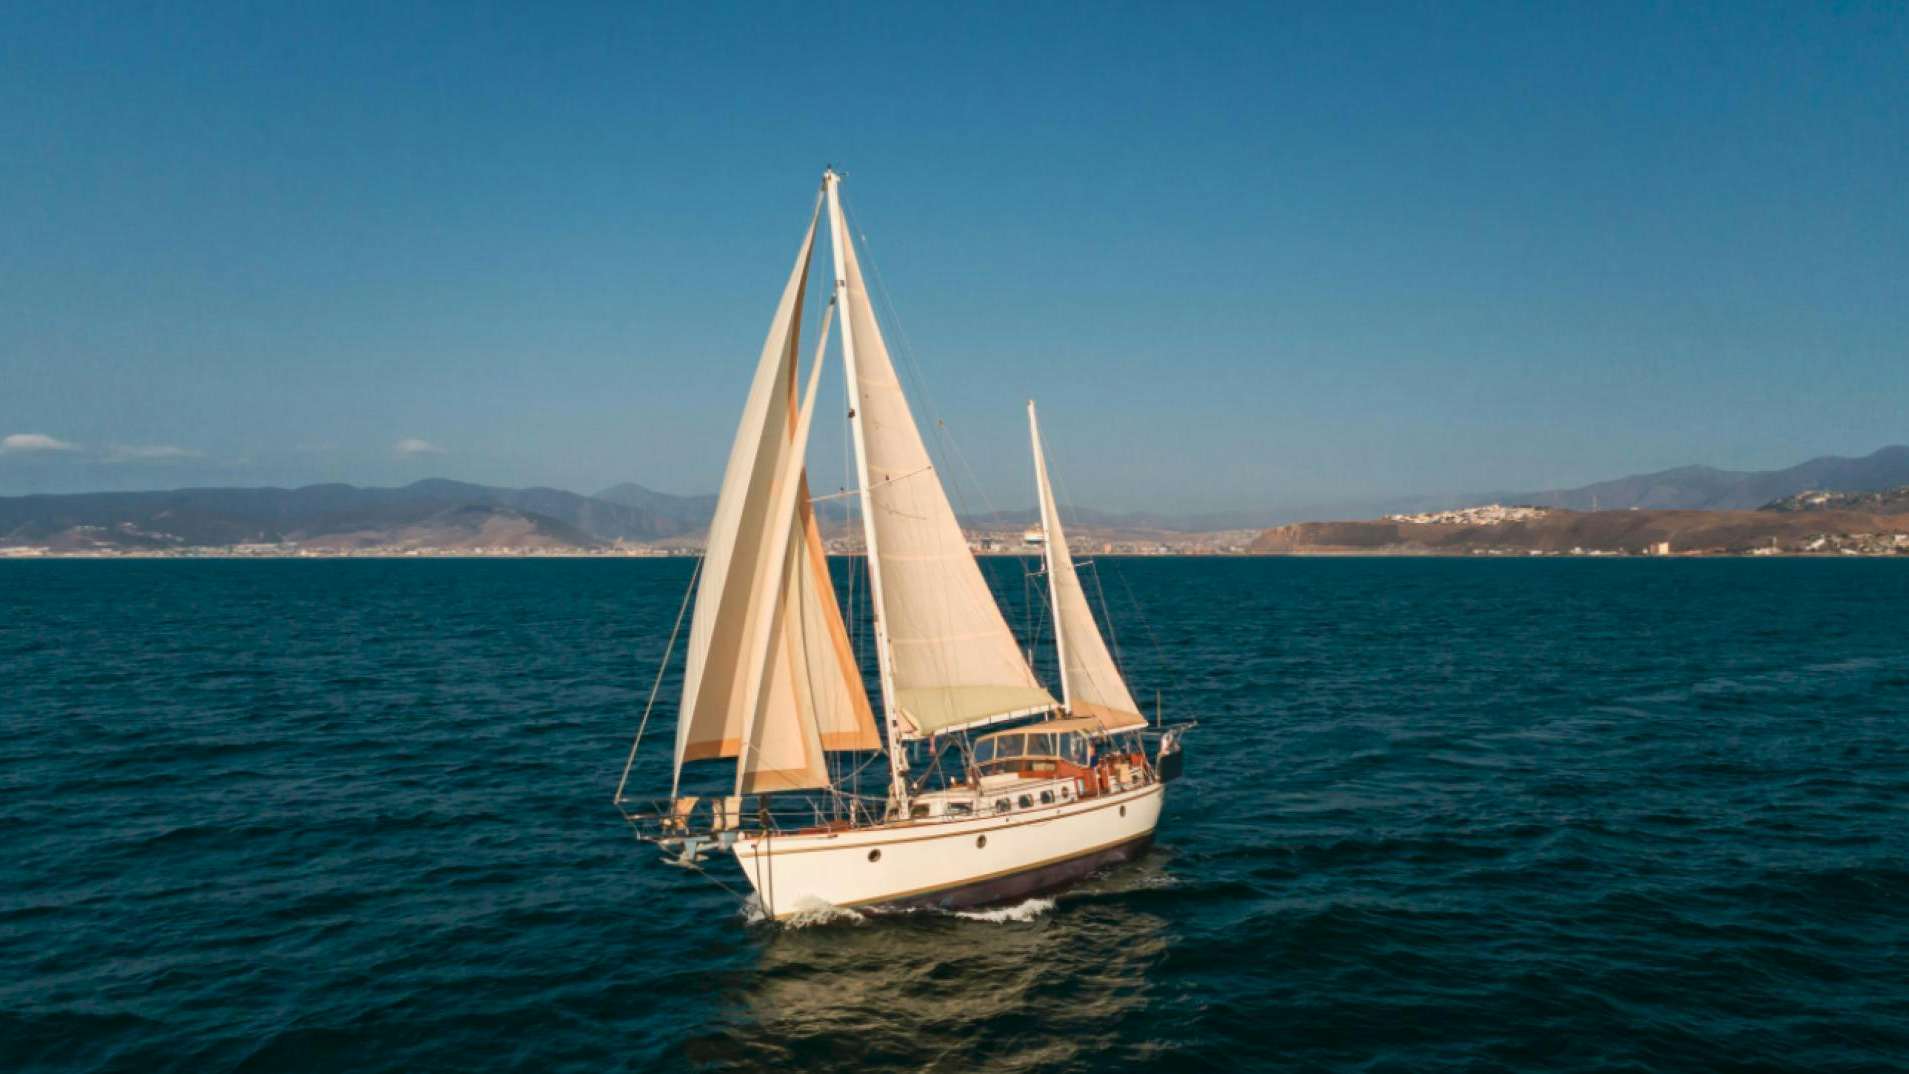 a sailboat on the water aboard Iolair Mara Yacht for Sale